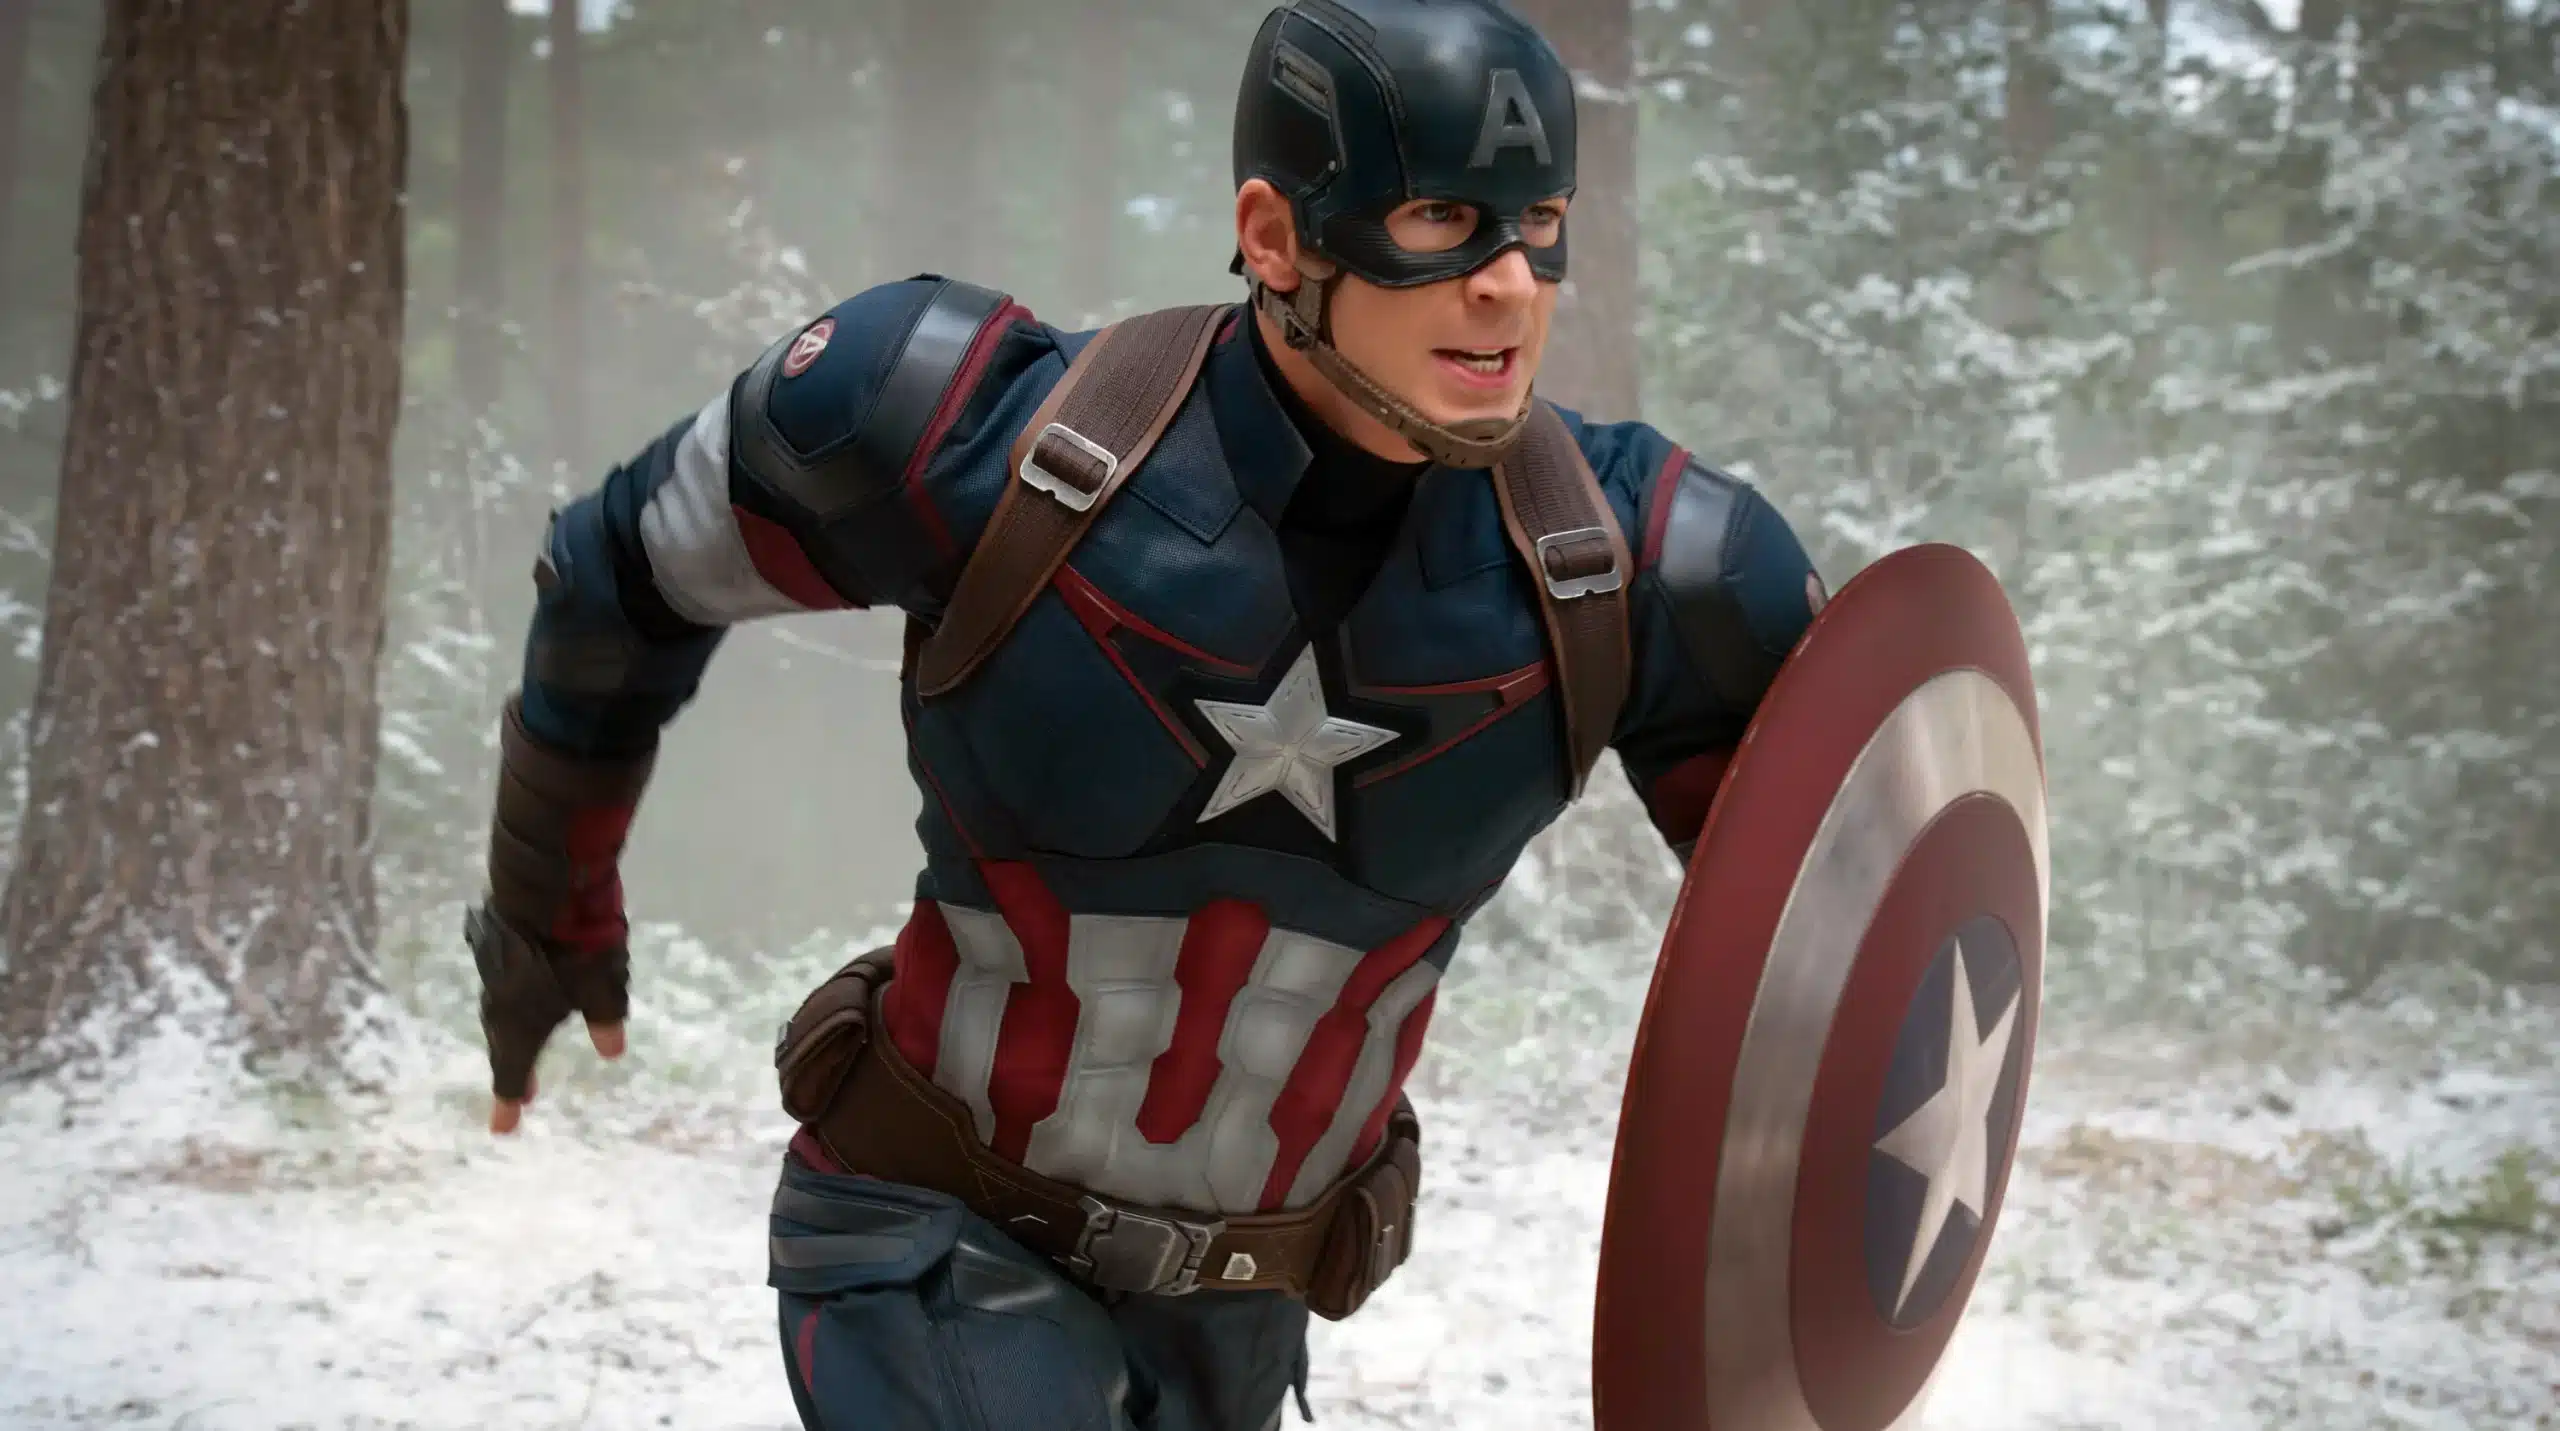 Chris Evans Back In The Mcu: Captain America Or The Human Torch?